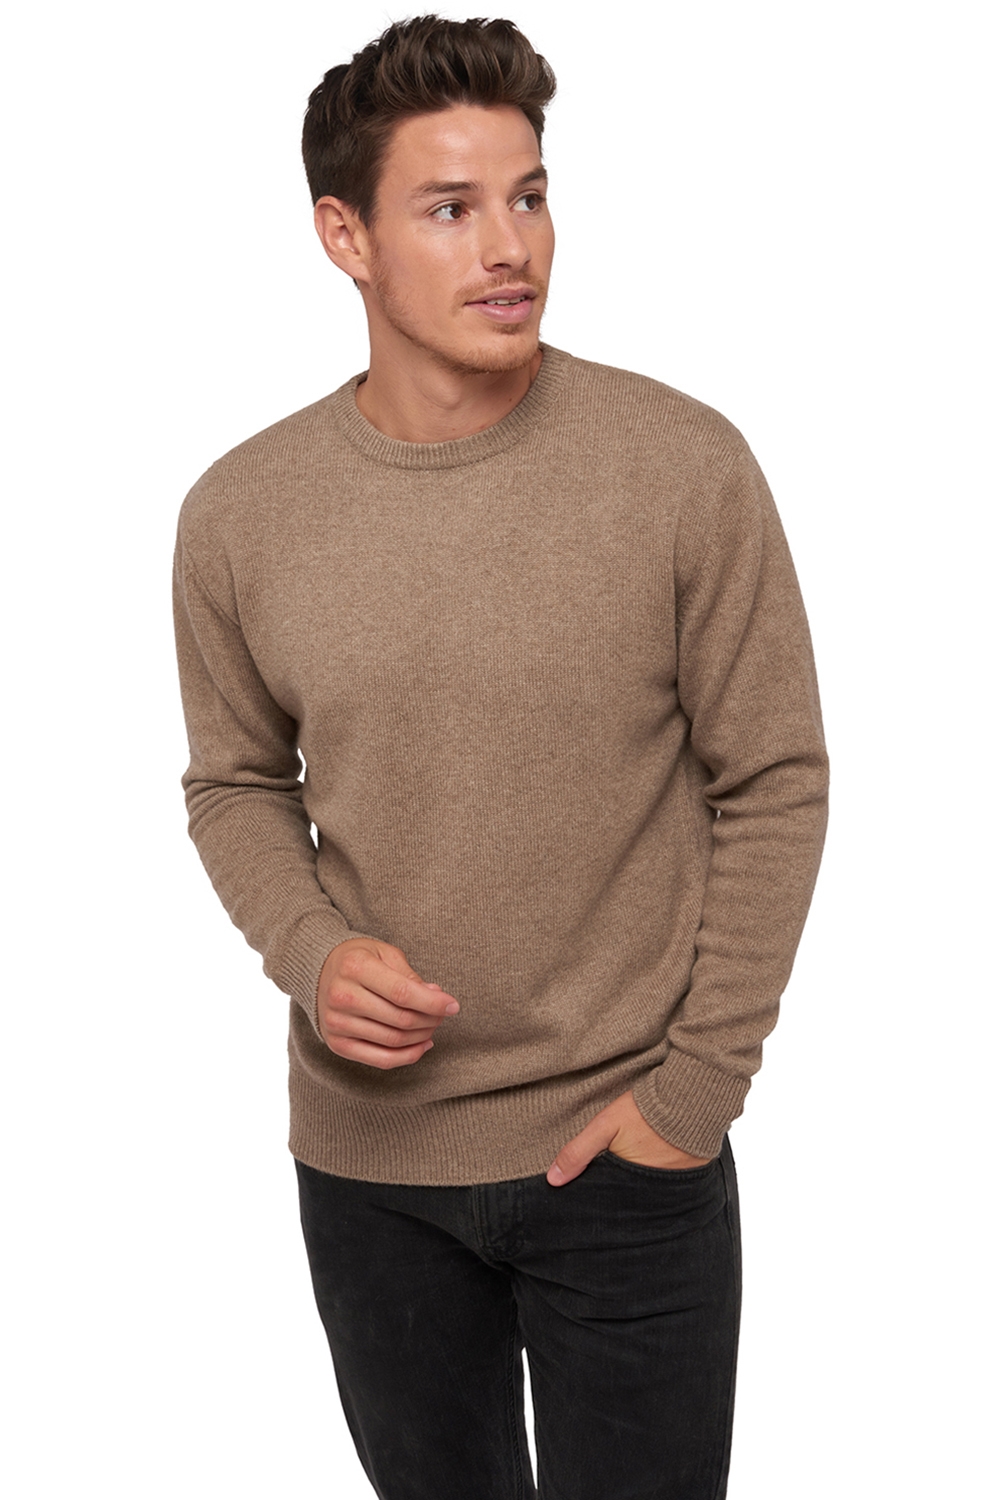 Cachemire Naturel pull homme natural ness 4f natural brown 3xl